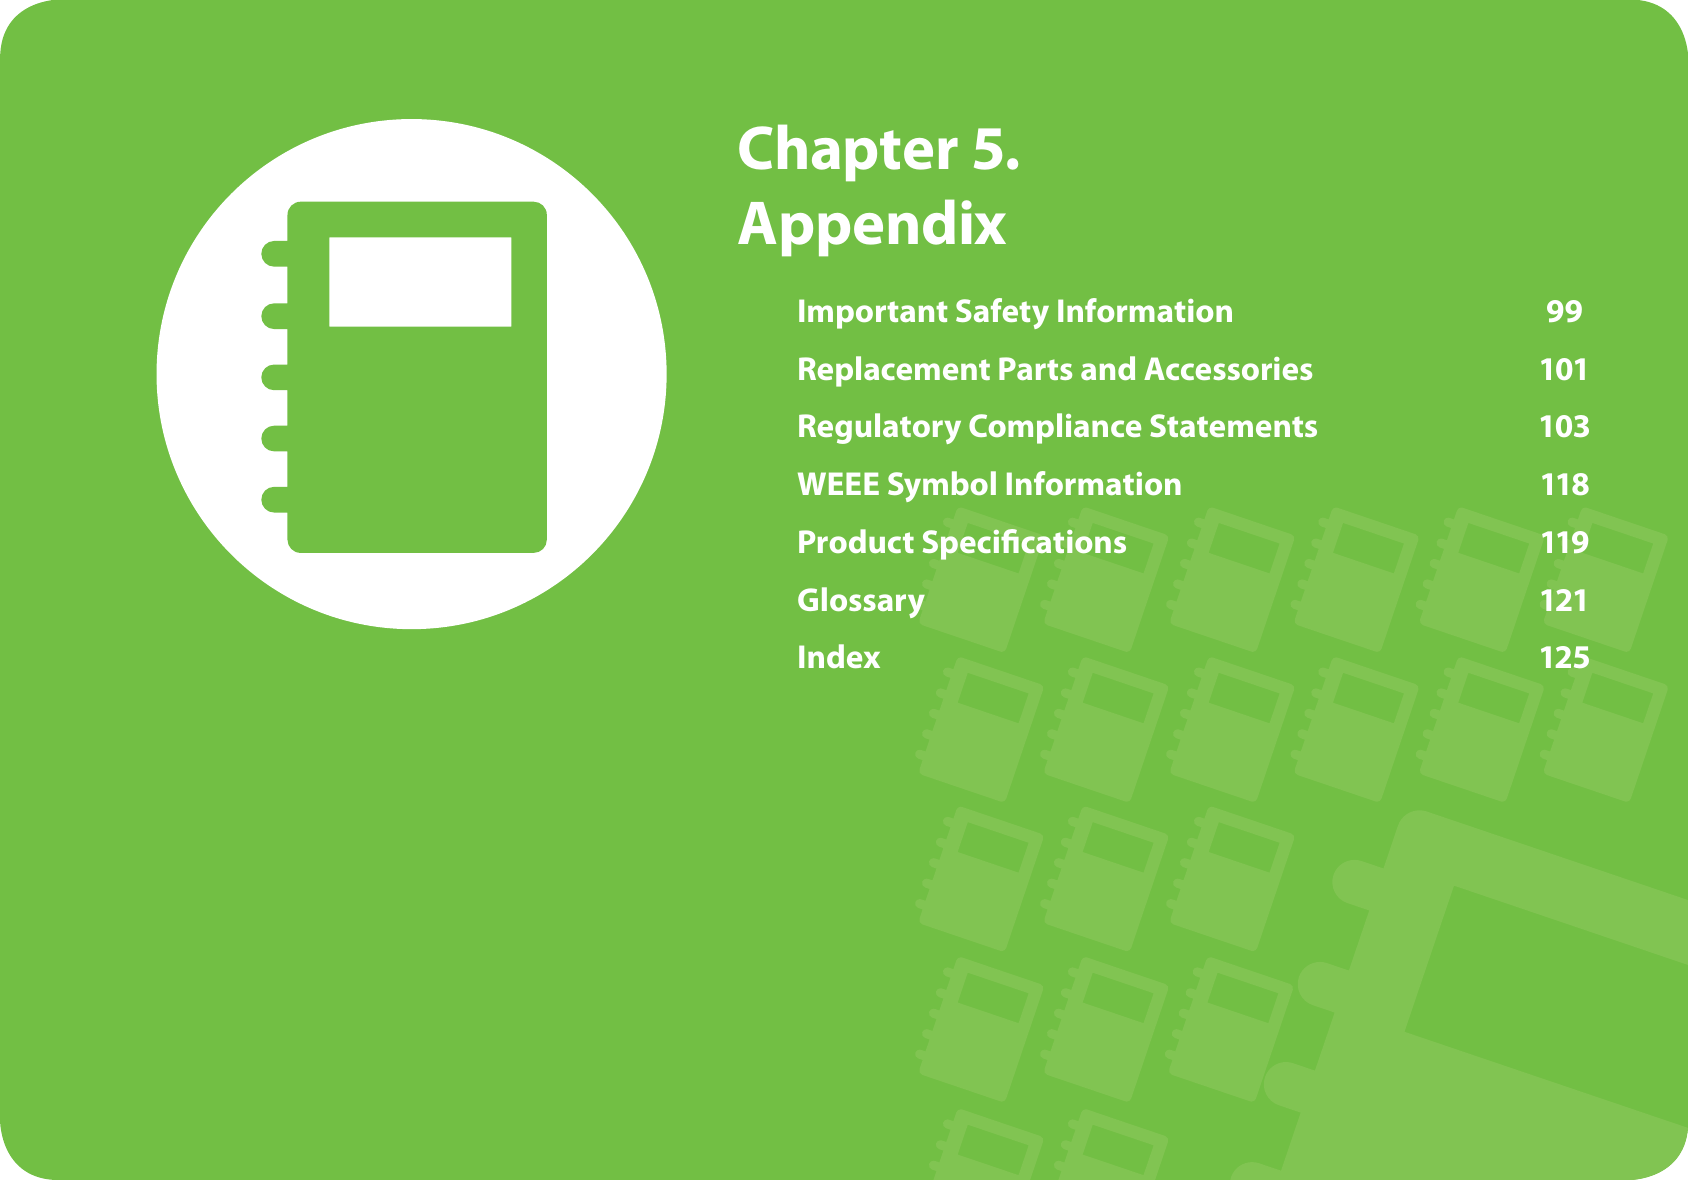  Chapter  5. AppendixImportant Safety Information  99Replacement Parts and Accessories  101Regulatory Compliance Statements  103WEEE Symbol Information  118Product Speciﬁ cations  119Glossary 121Index 125